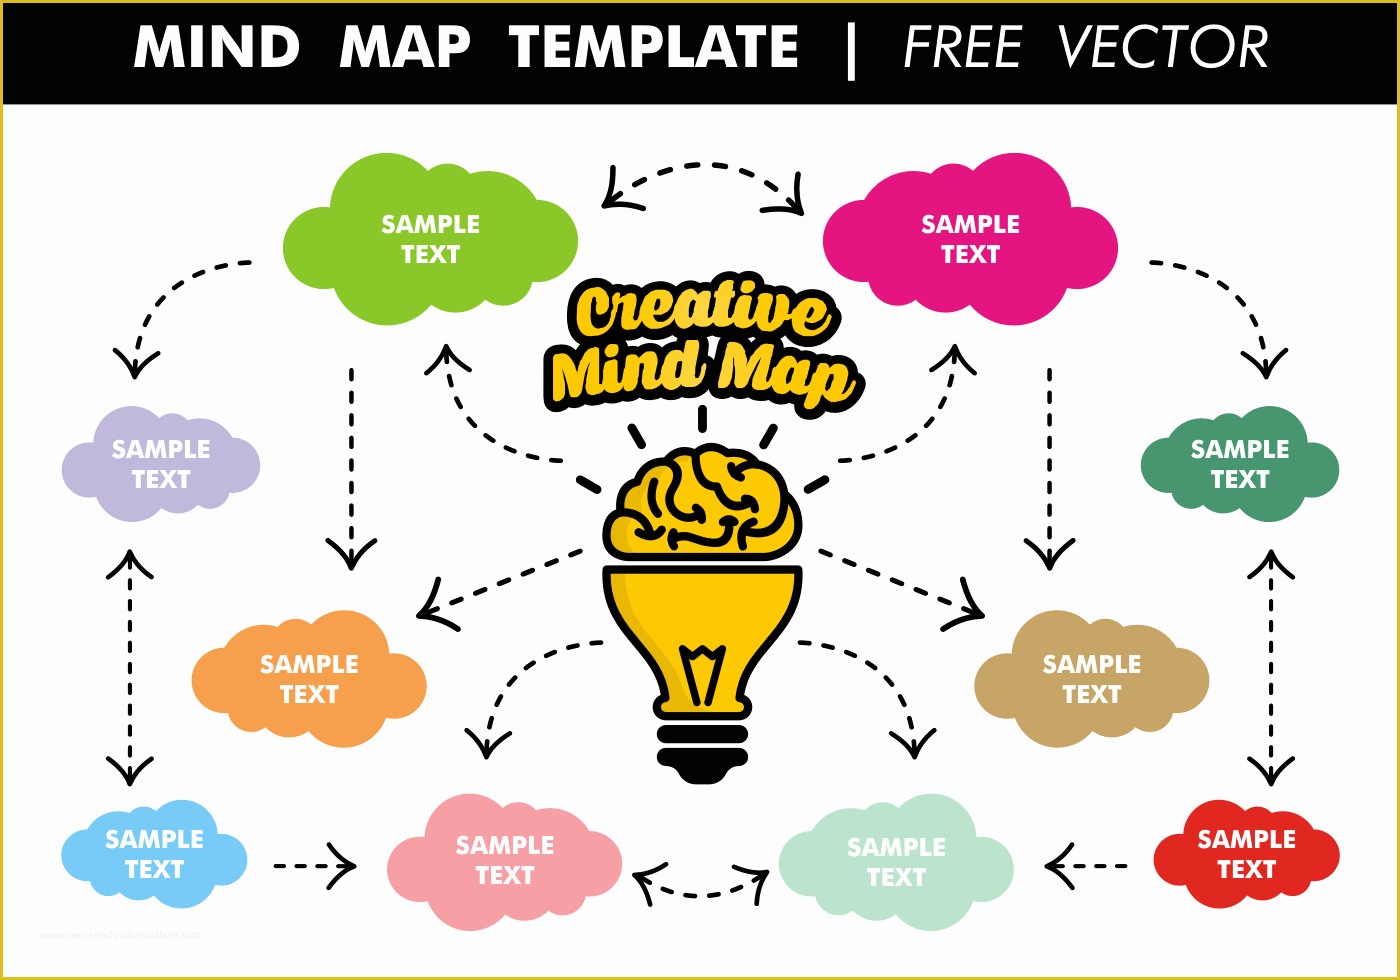 Free Mind Map Template Of Mind Map Template Free Vector Download Free Vector Art